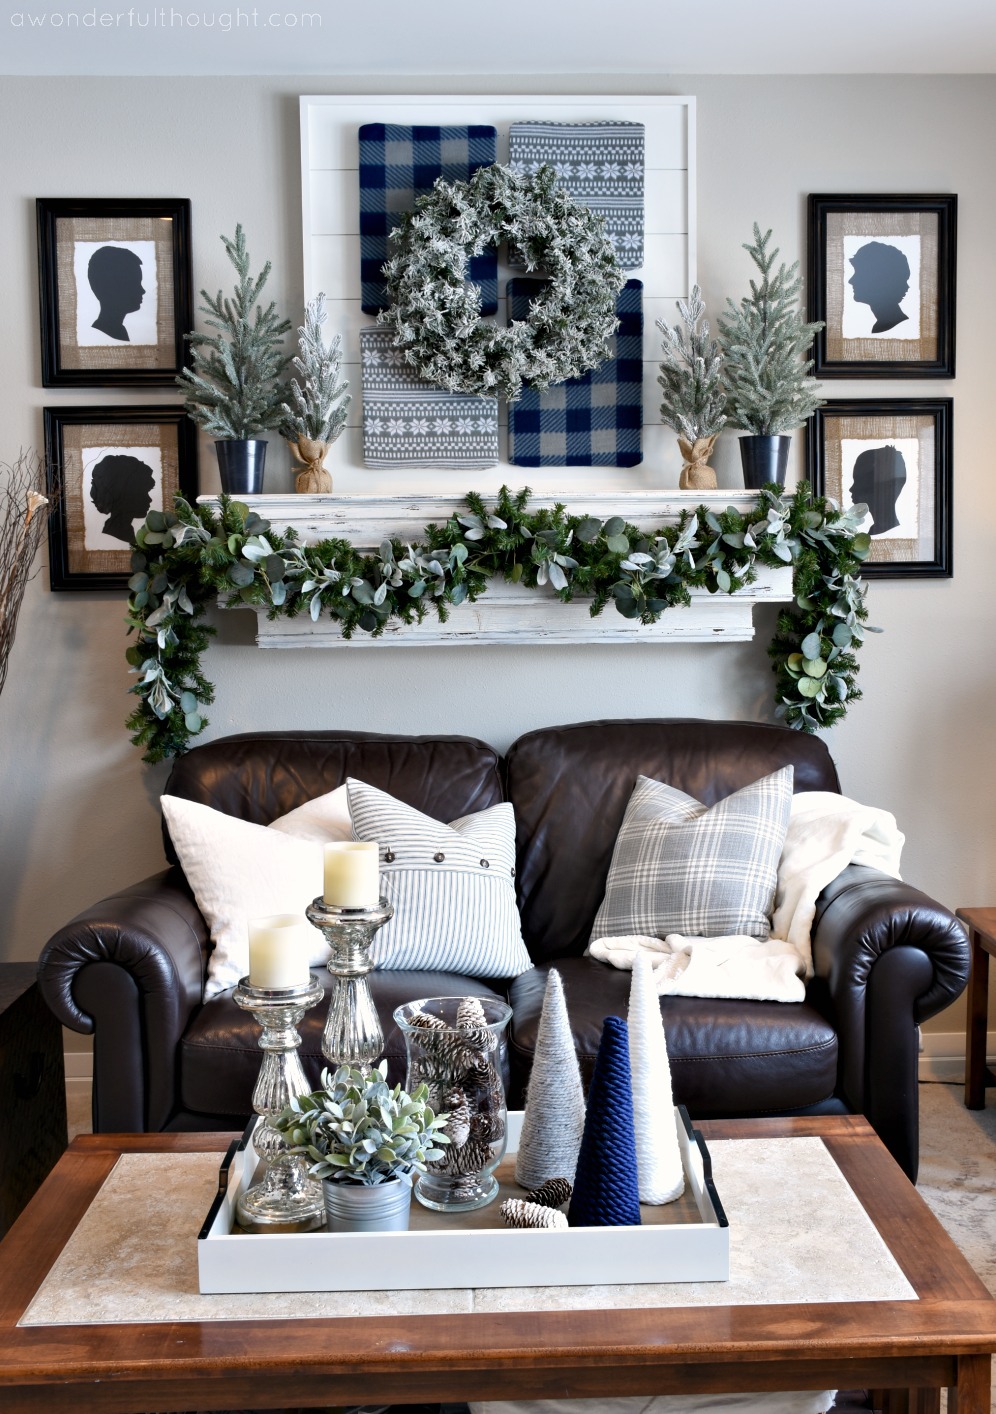 Winter Decor After Christmas - A Wonderful Thought